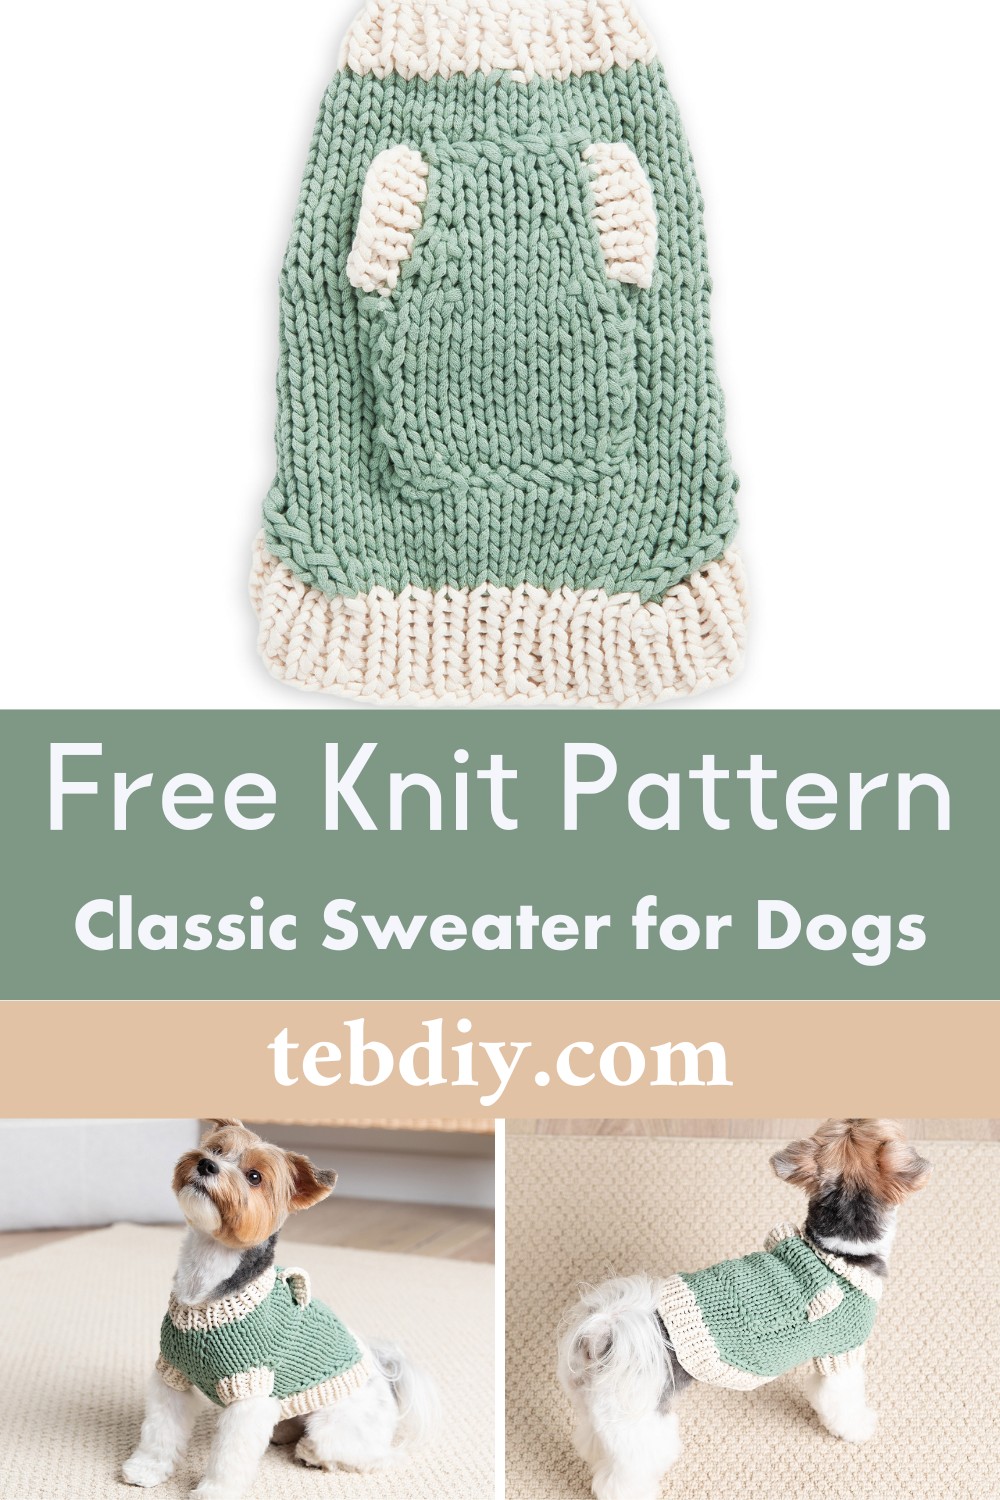 Classic Sweater for Dogs